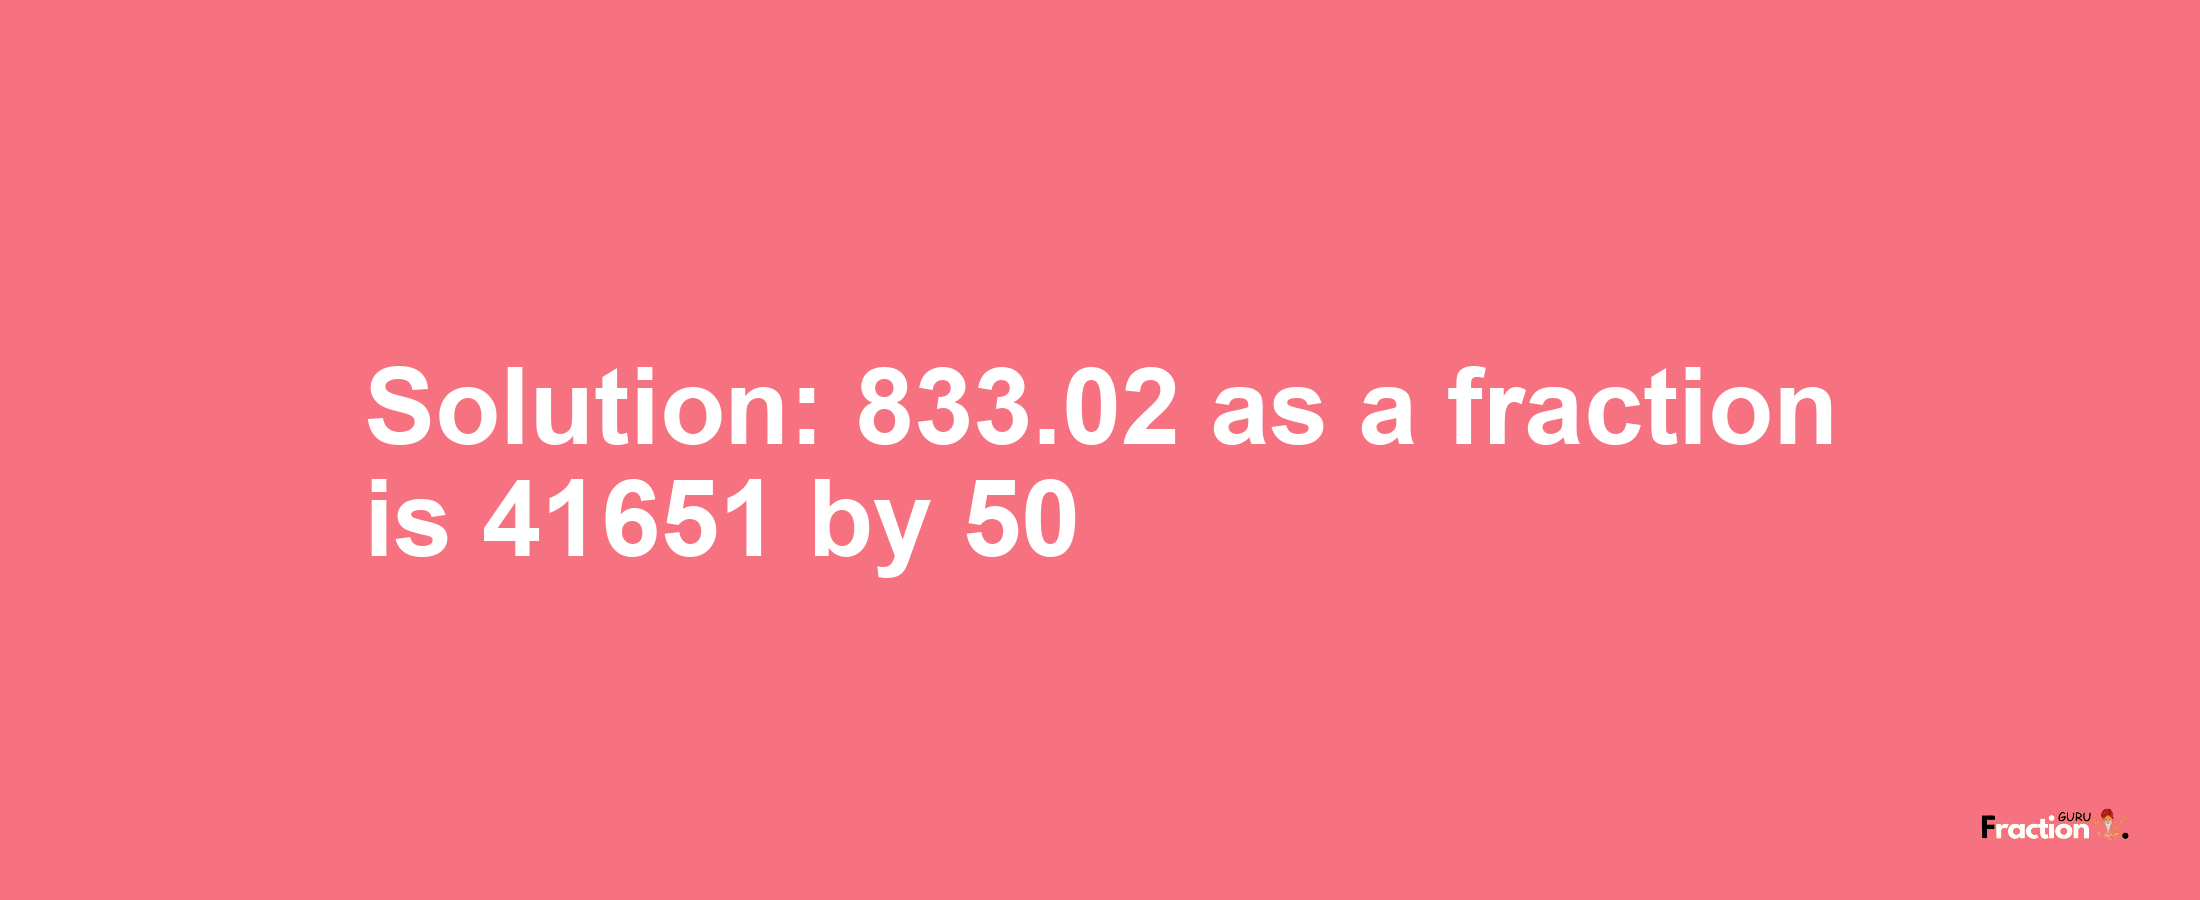 Solution:833.02 as a fraction is 41651/50